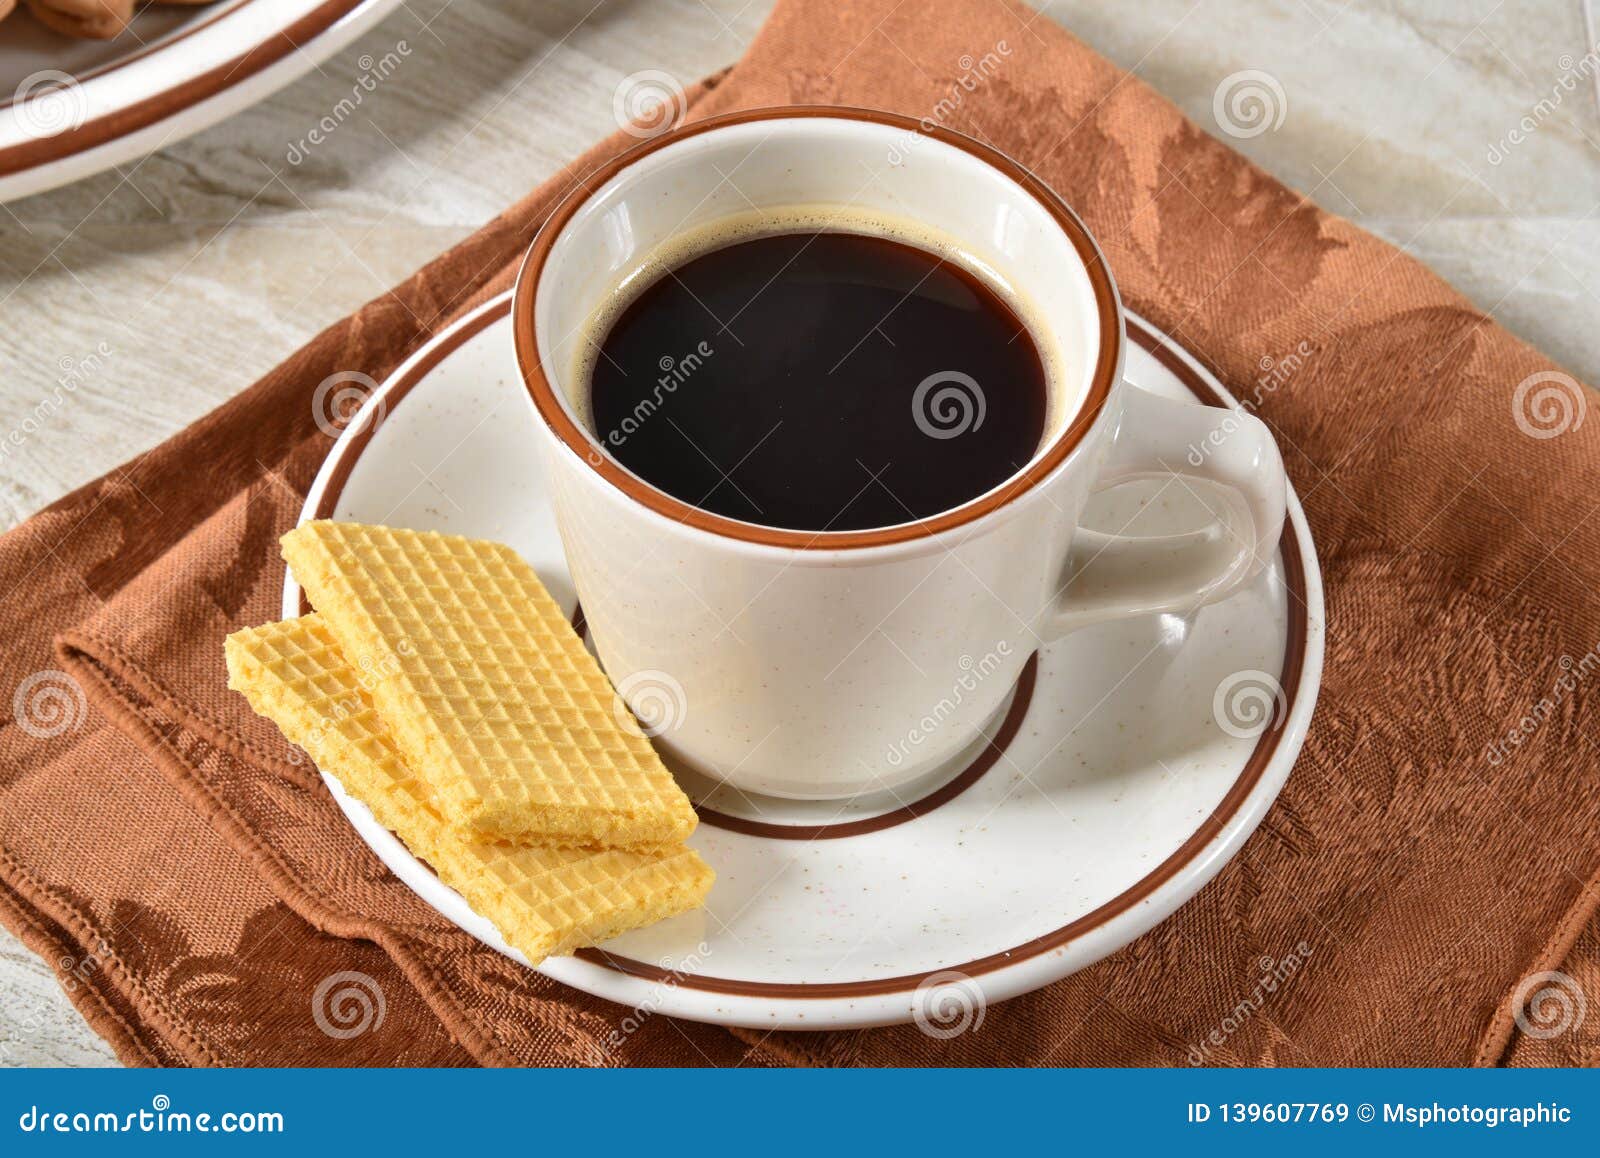 Wafer cookies and coffee stock image. Image of beverage - 139607769